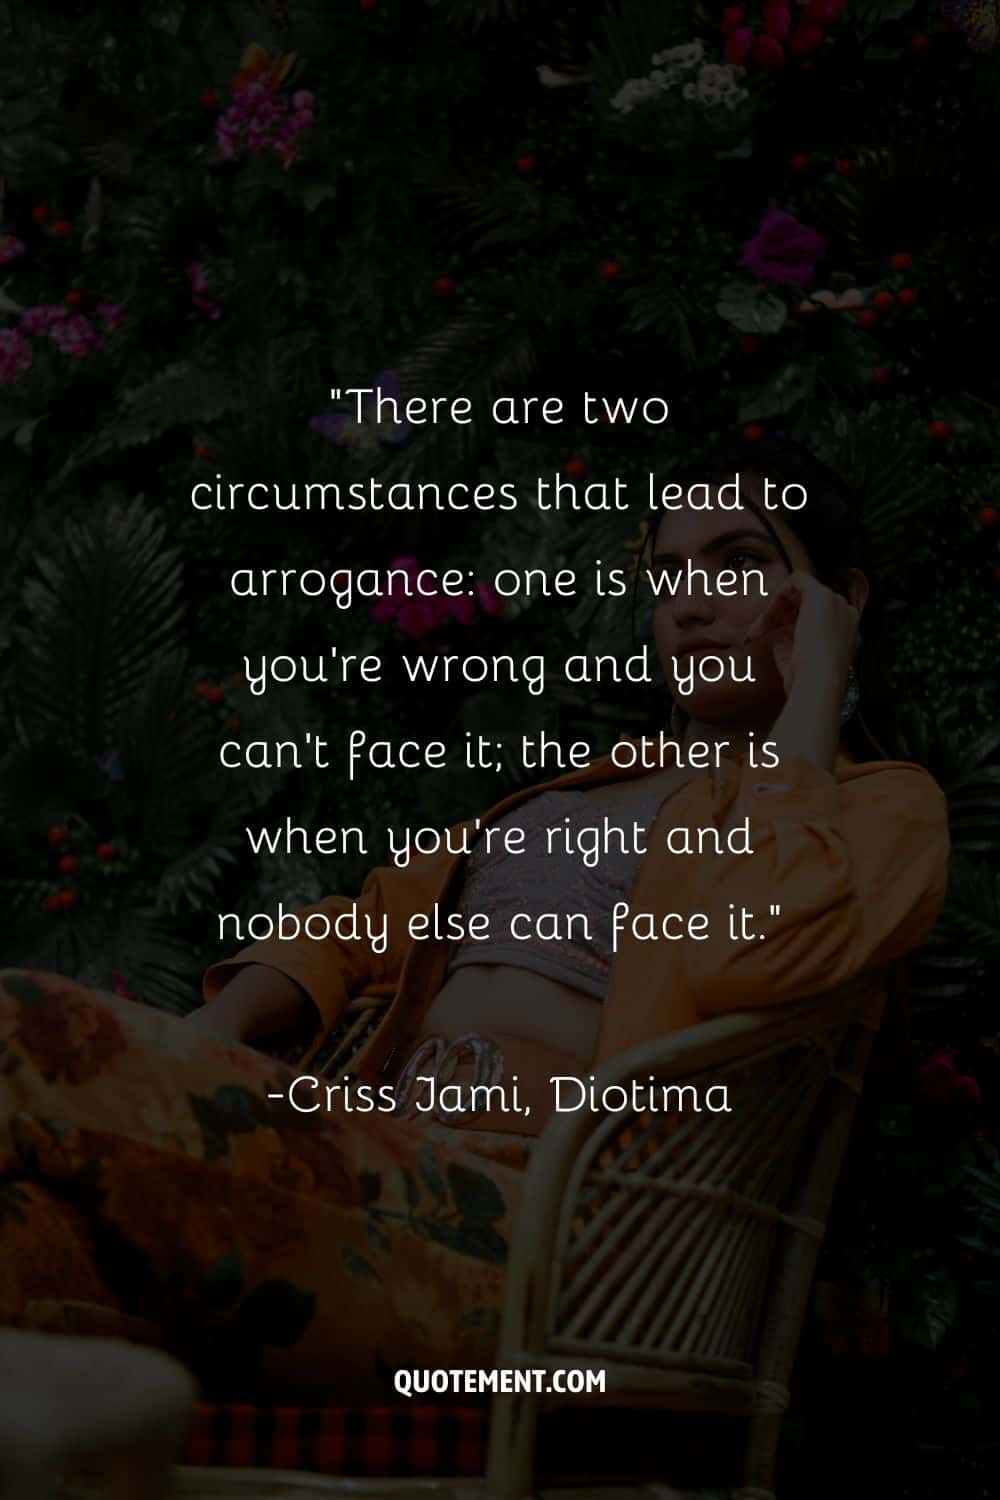 “There are two circumstances that lead to arrogance one is when you're wrong and you can't face it; the other is when you're right and nobody else can face it.